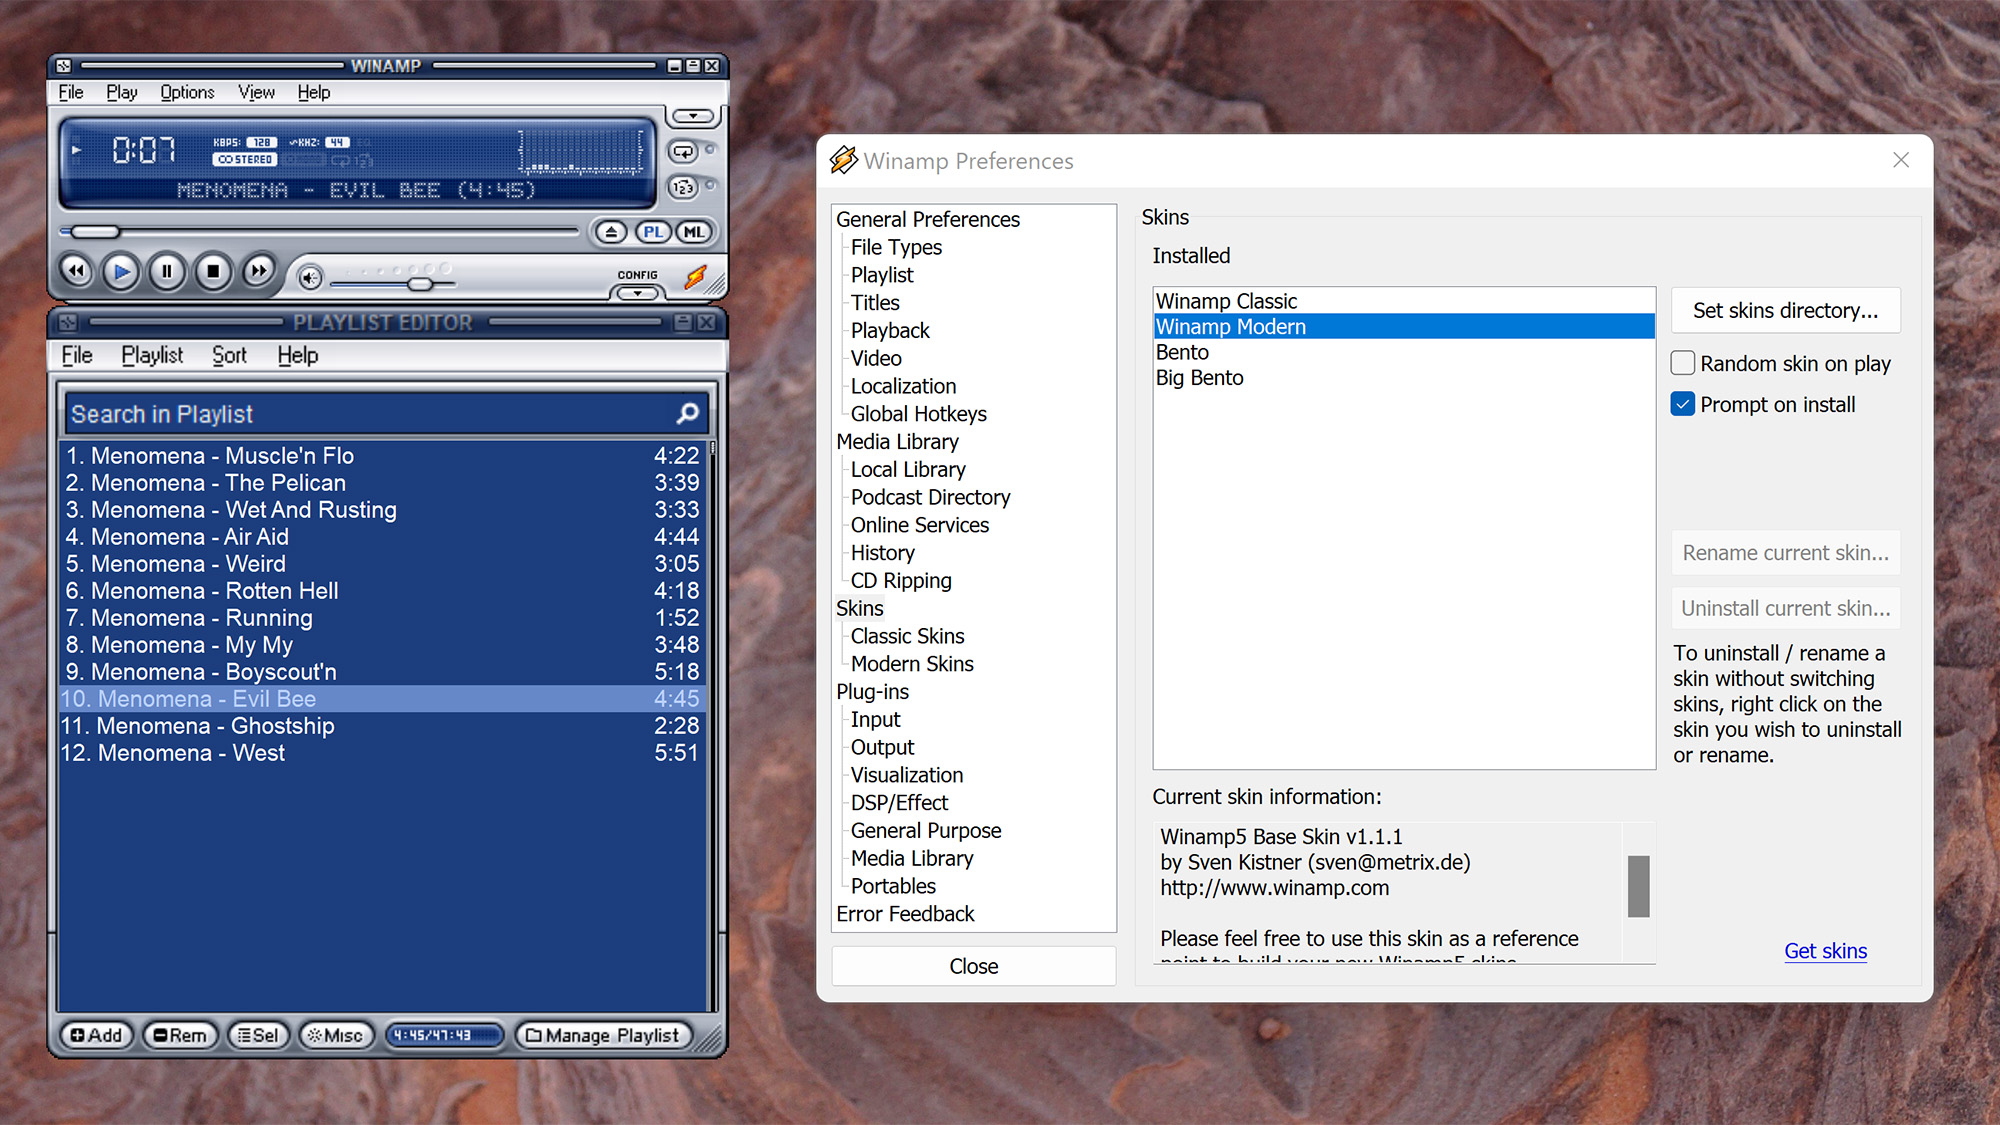 3 ways to recreate the Winamp look and feel on your favorite devices